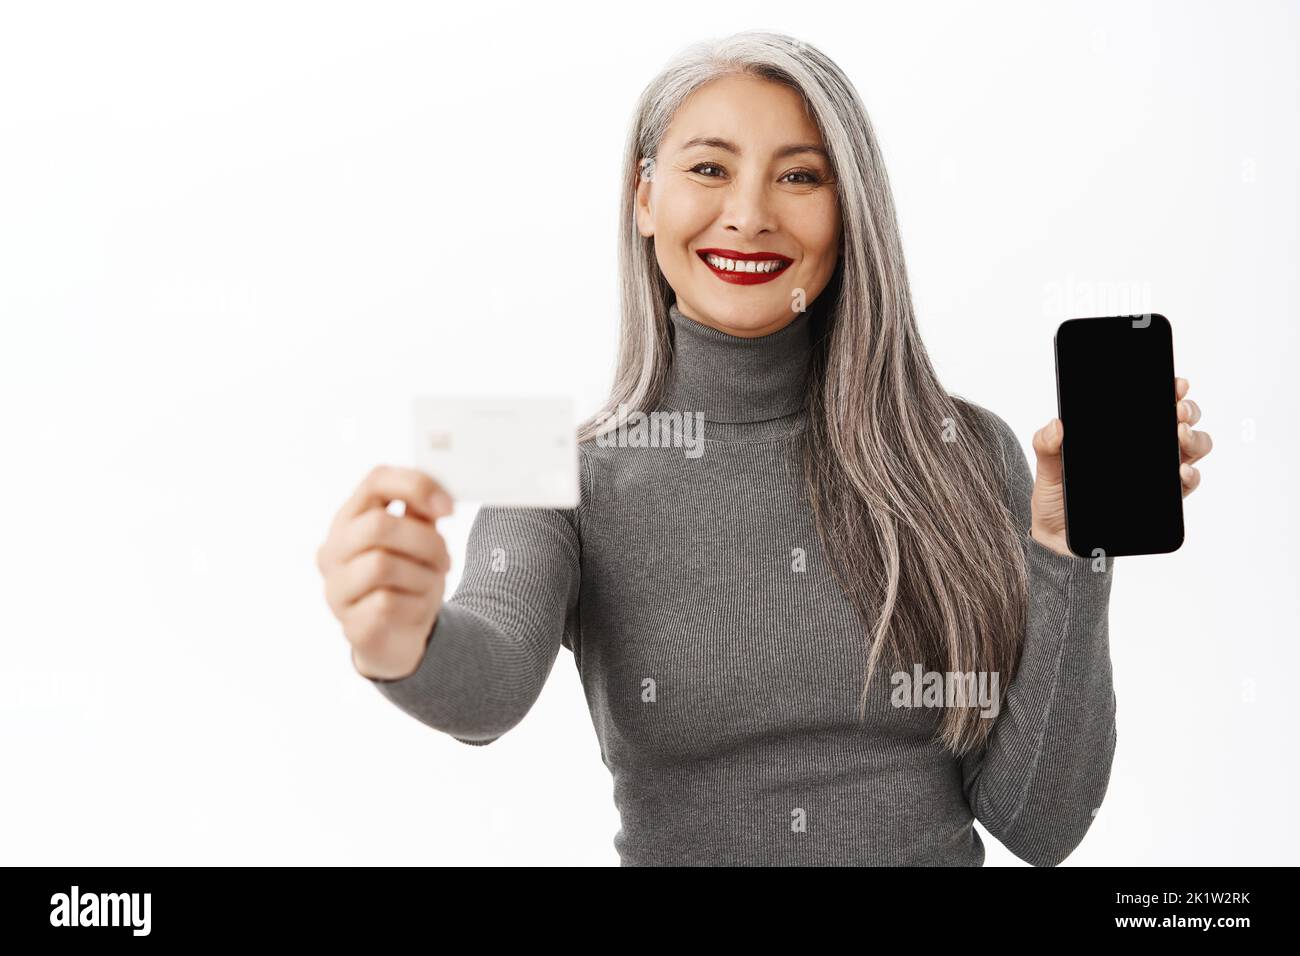 Bank and people concept. Happy asian lady showing mobile phone screen, credit card, demonstrates app interface on smartphone, standing over white back Stock Photo